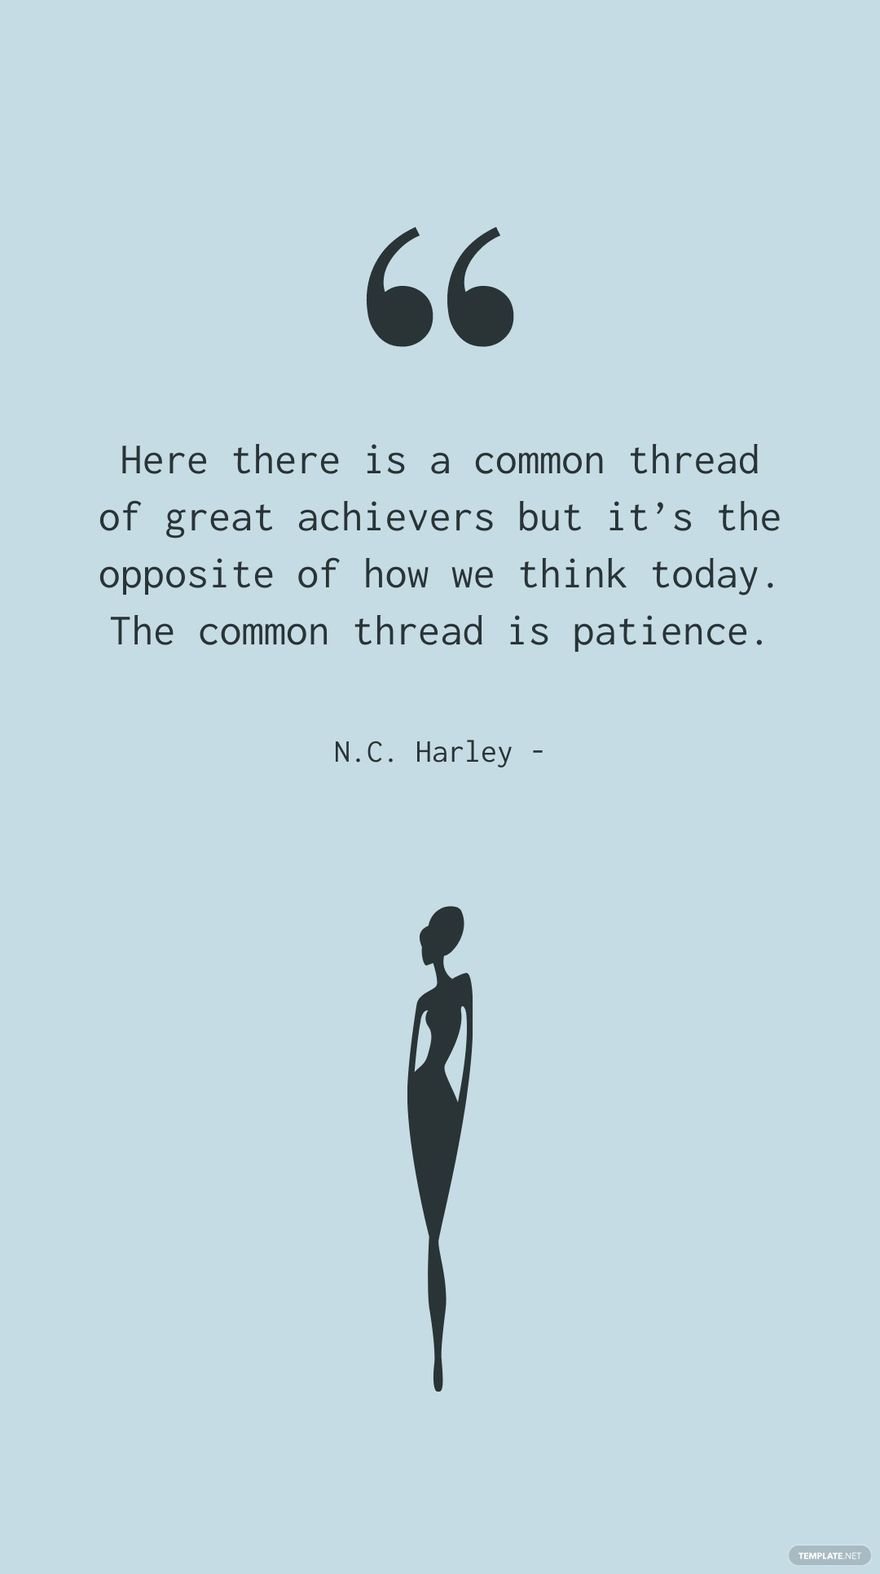 N.C. Harley - Here there is a common thread of great achievers but it’s the opposite of how we think today. The common thread is patience.